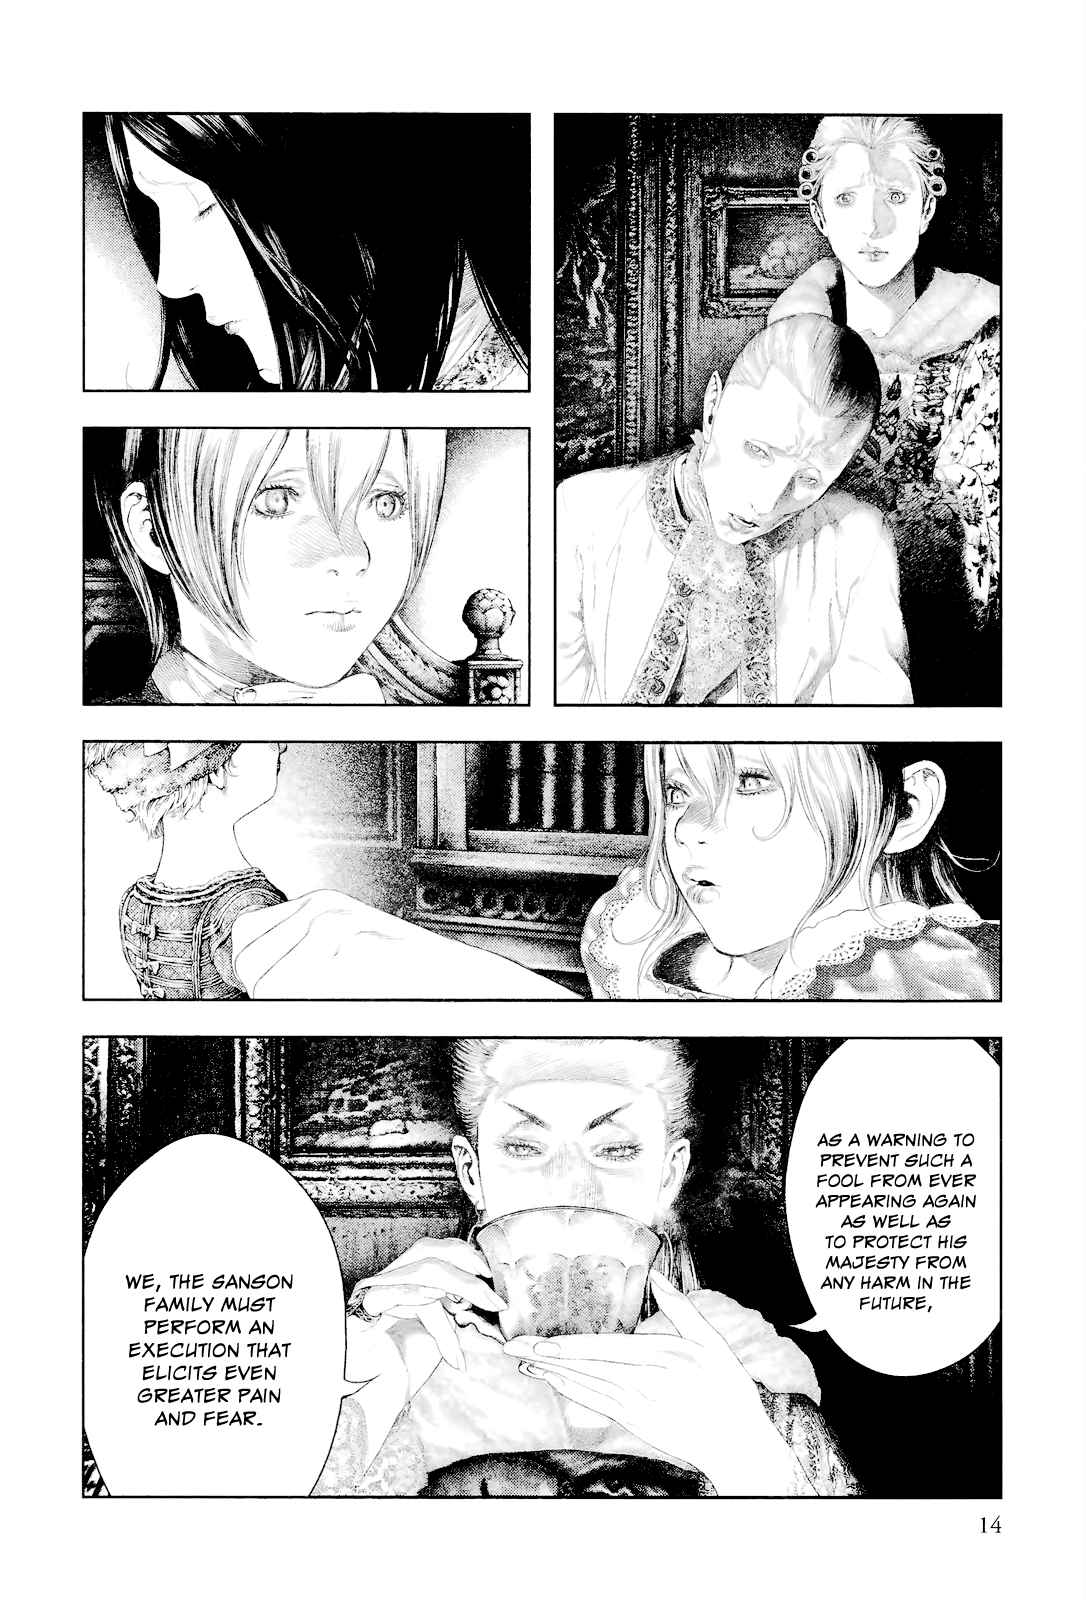 Innocent Vol. 3 Ch. 21 Conflict of Blood Relatives